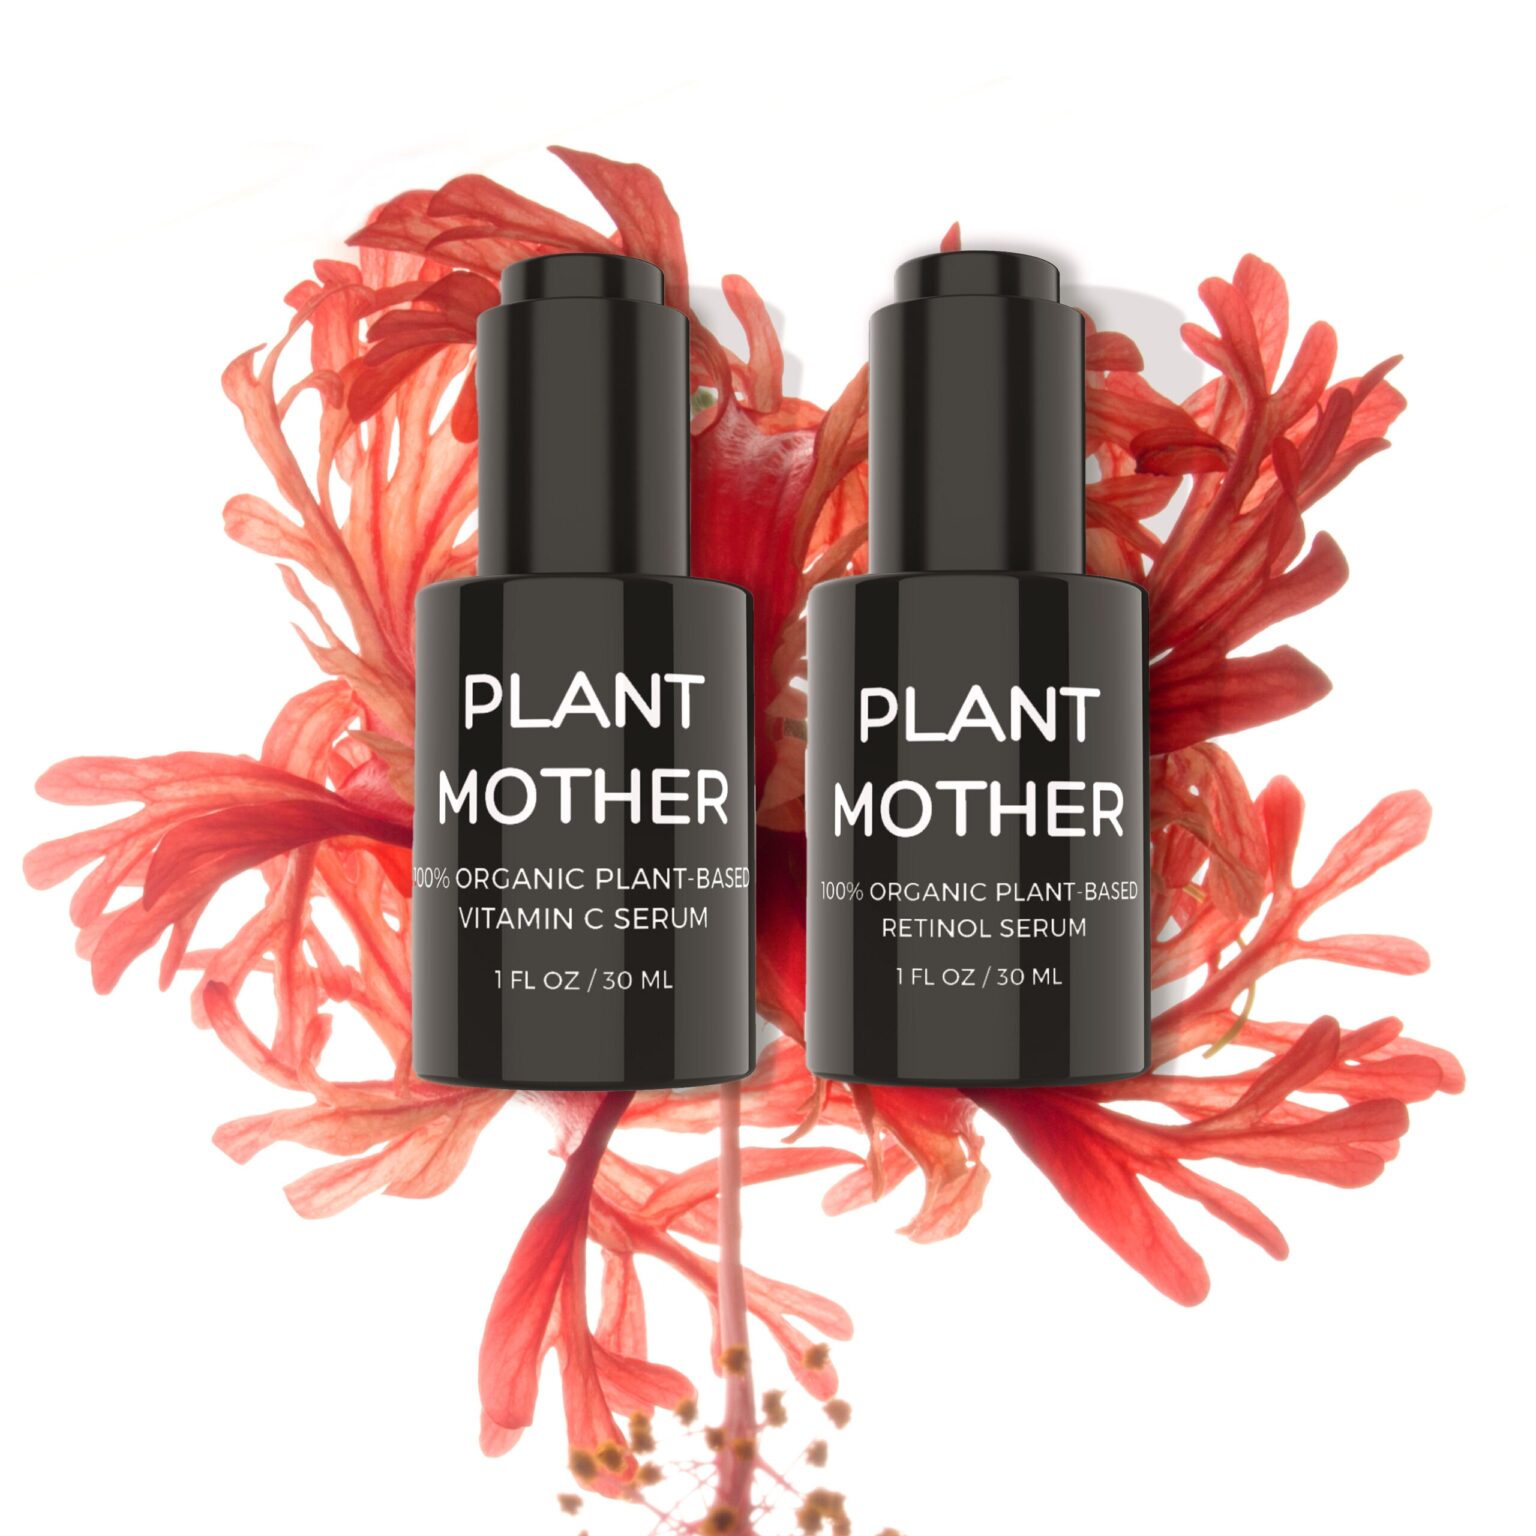 Plant Mother makes vegan beauty products that are changing the way people use cosmetics. Try their vegan retinoal serum and be blown away today.